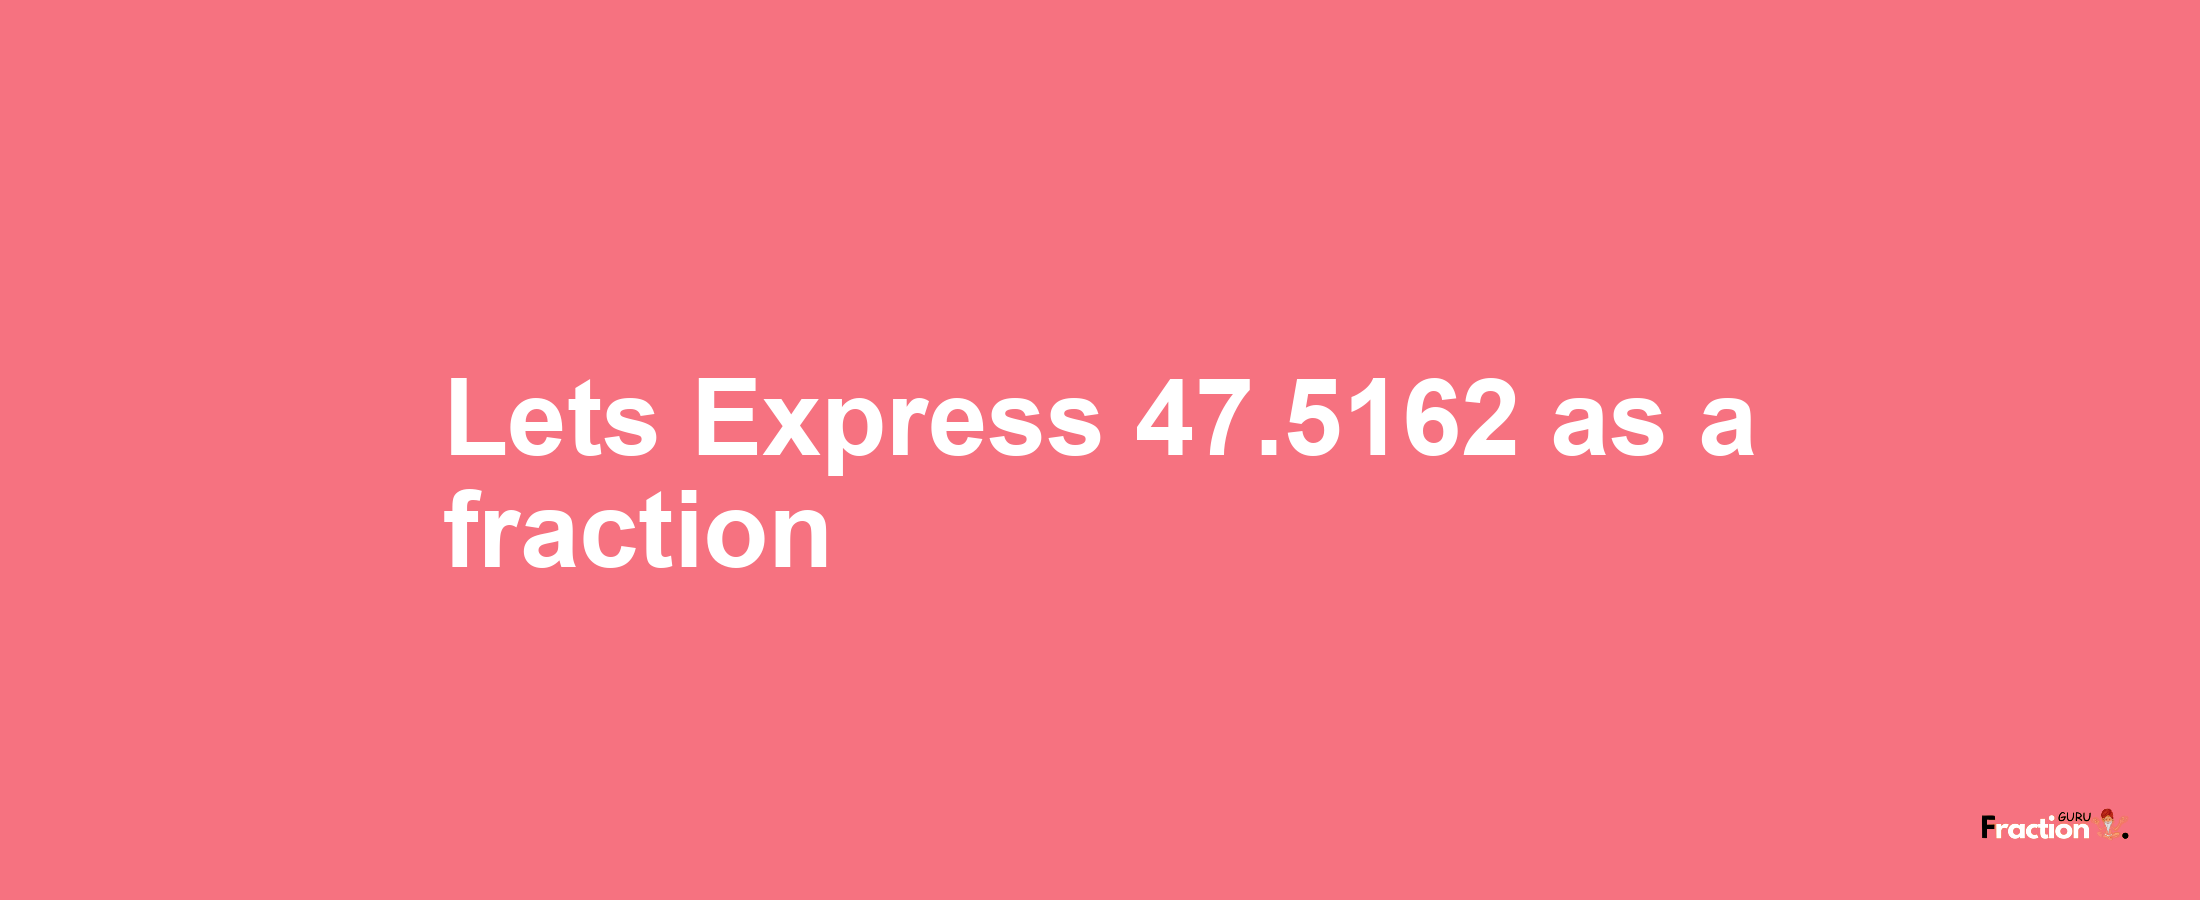 Lets Express 47.5162 as afraction